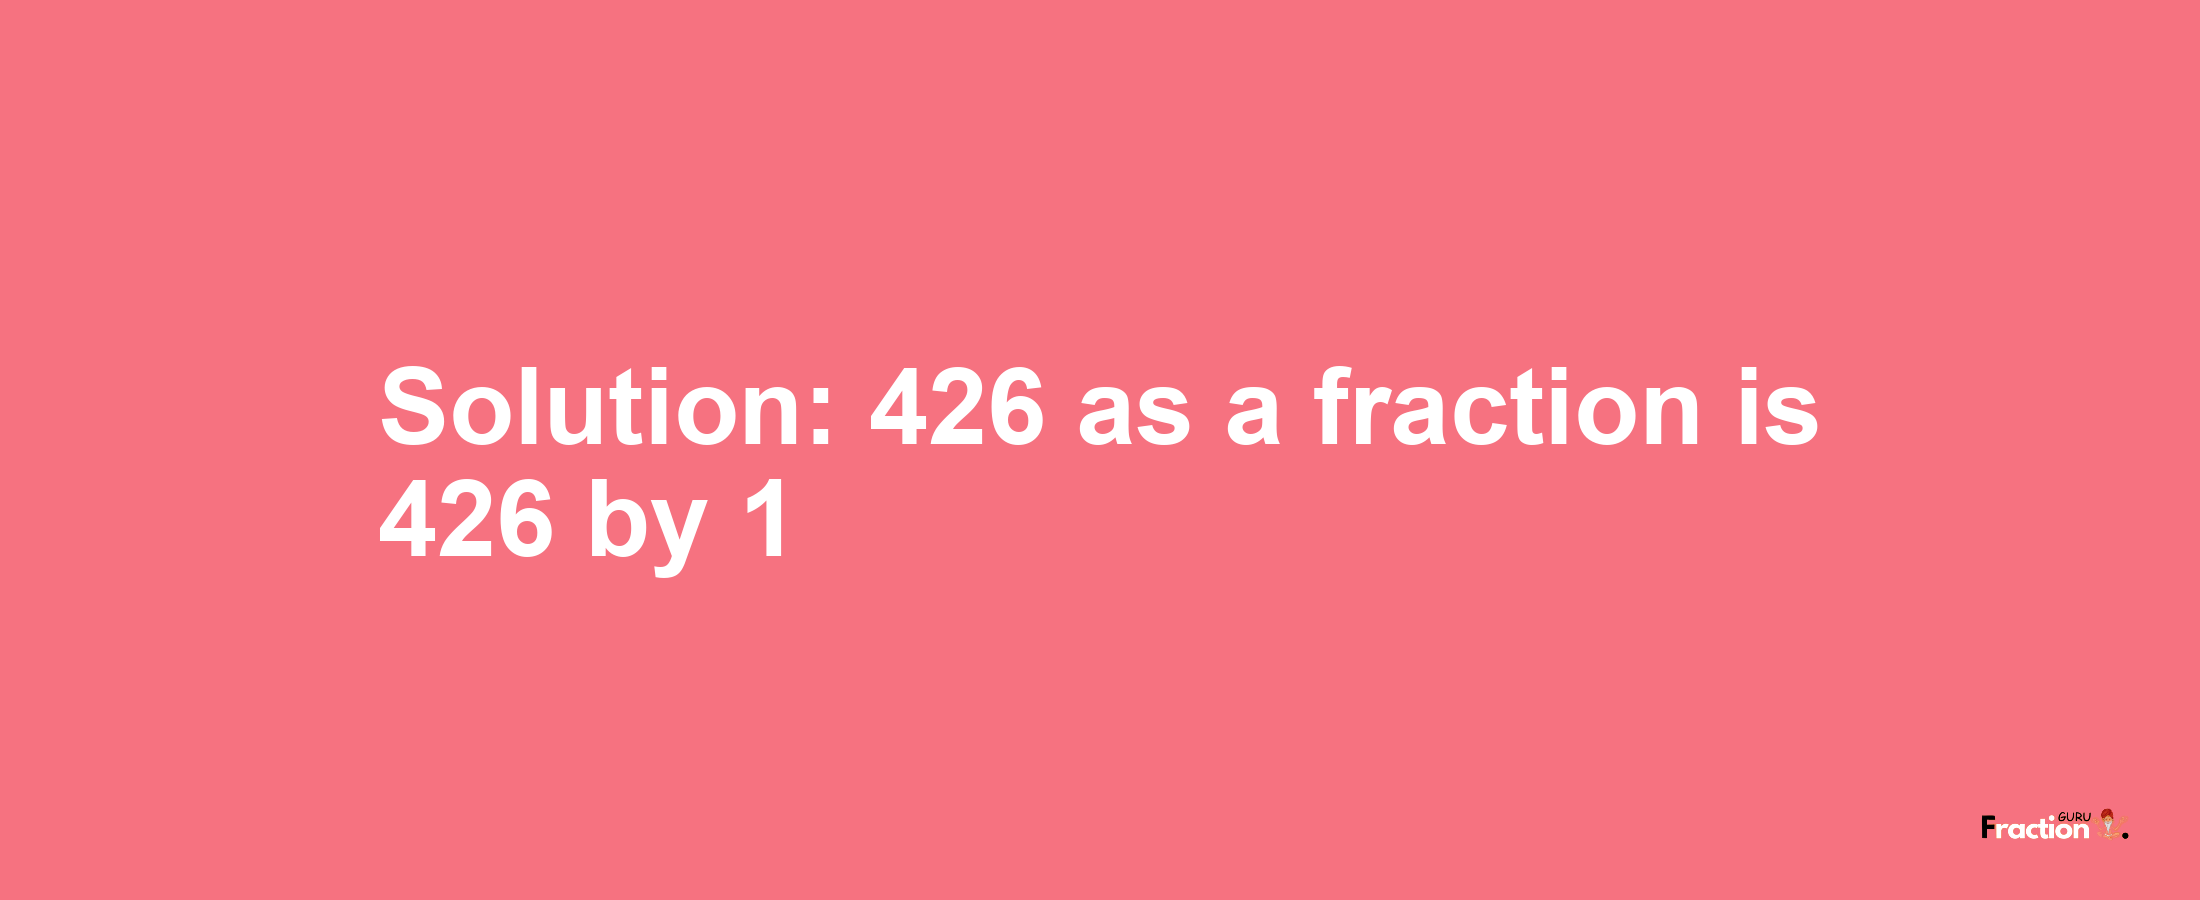 Solution:426 as a fraction is 426/1